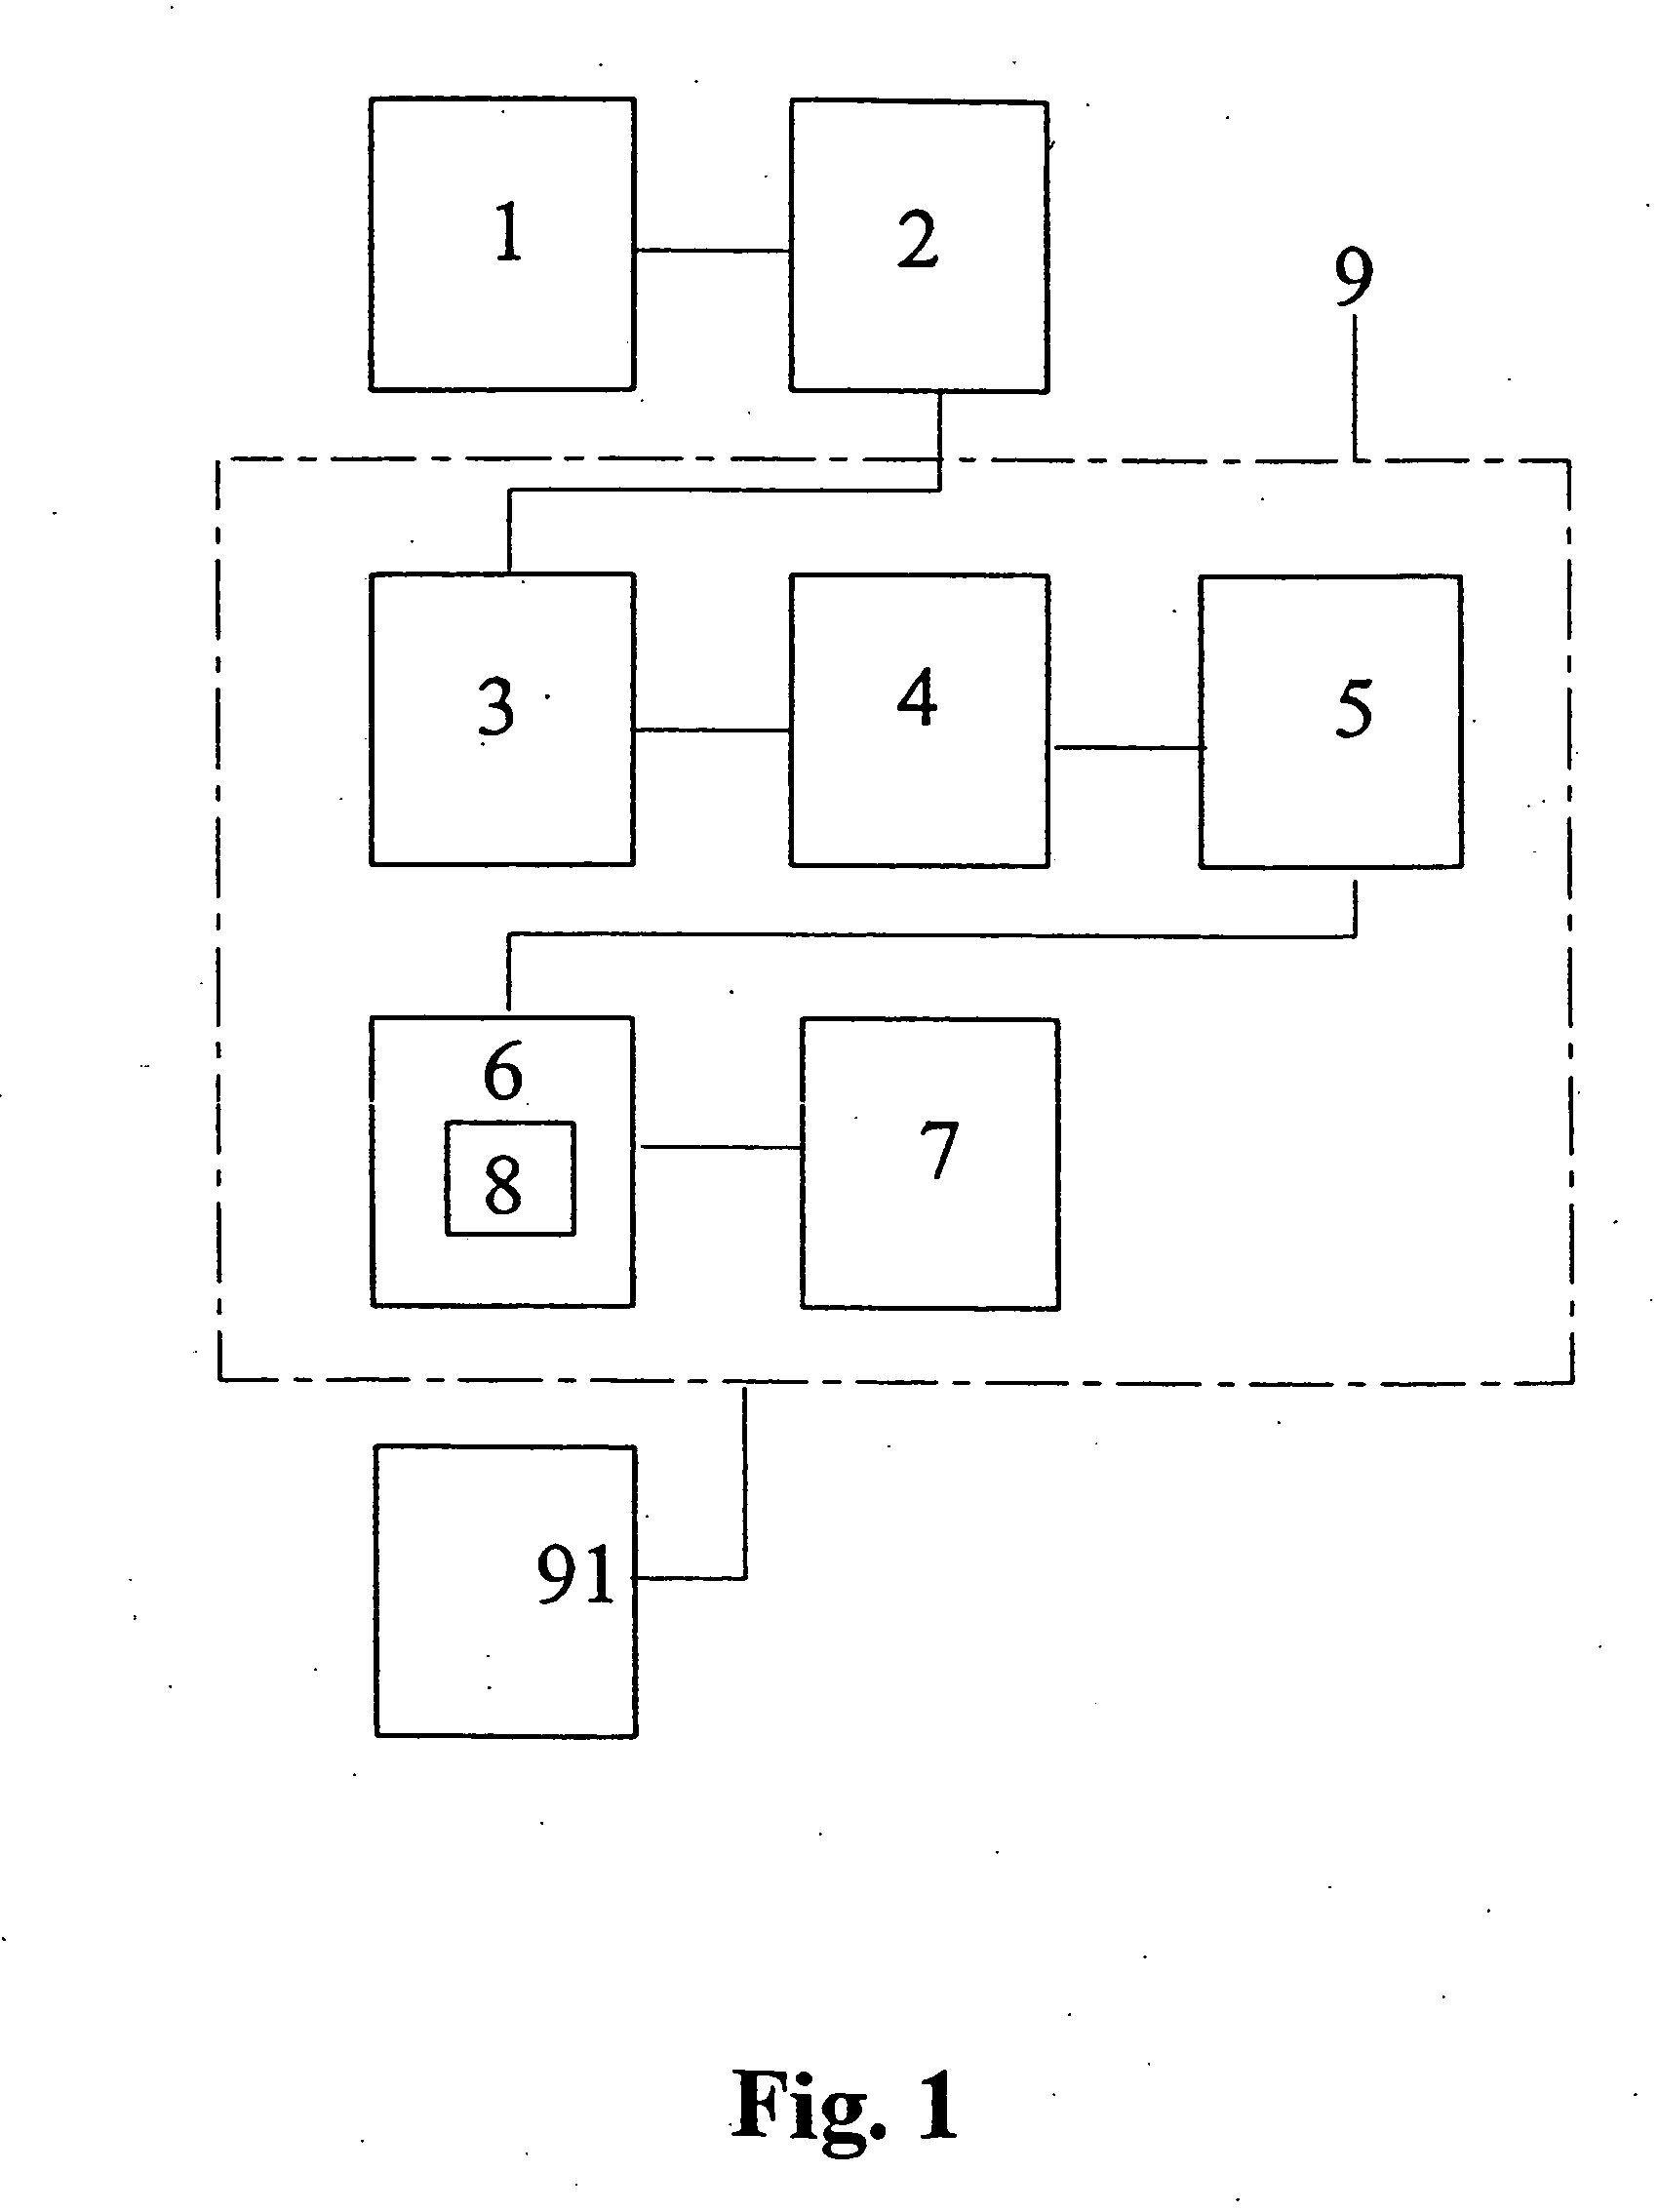 Non-invasive radial artery blood pressure waveform measuring apparatus system and uses thereof